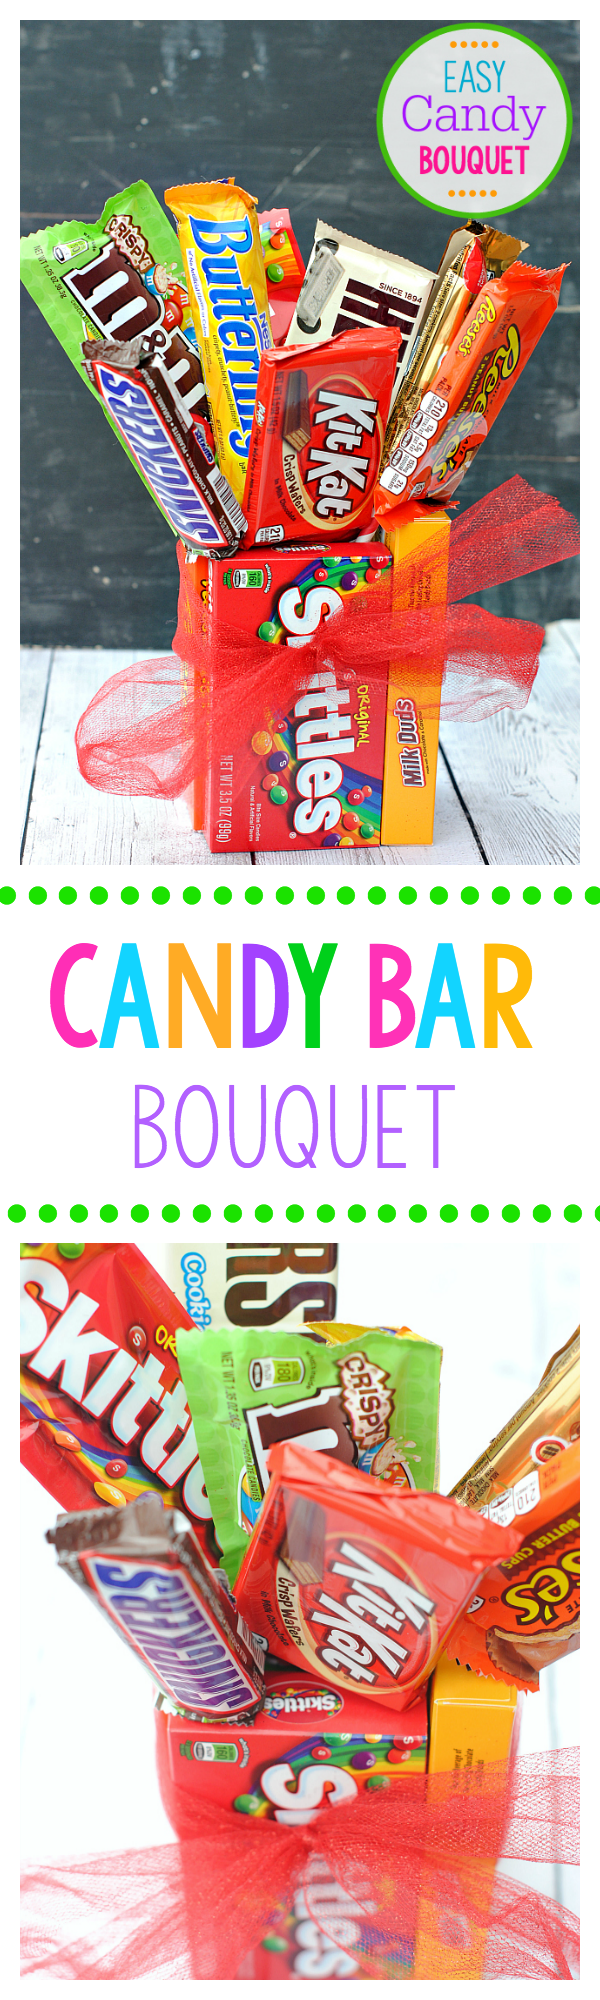 Make a Cute Candy Bar Bouquet for Birthdays or Special Occasions